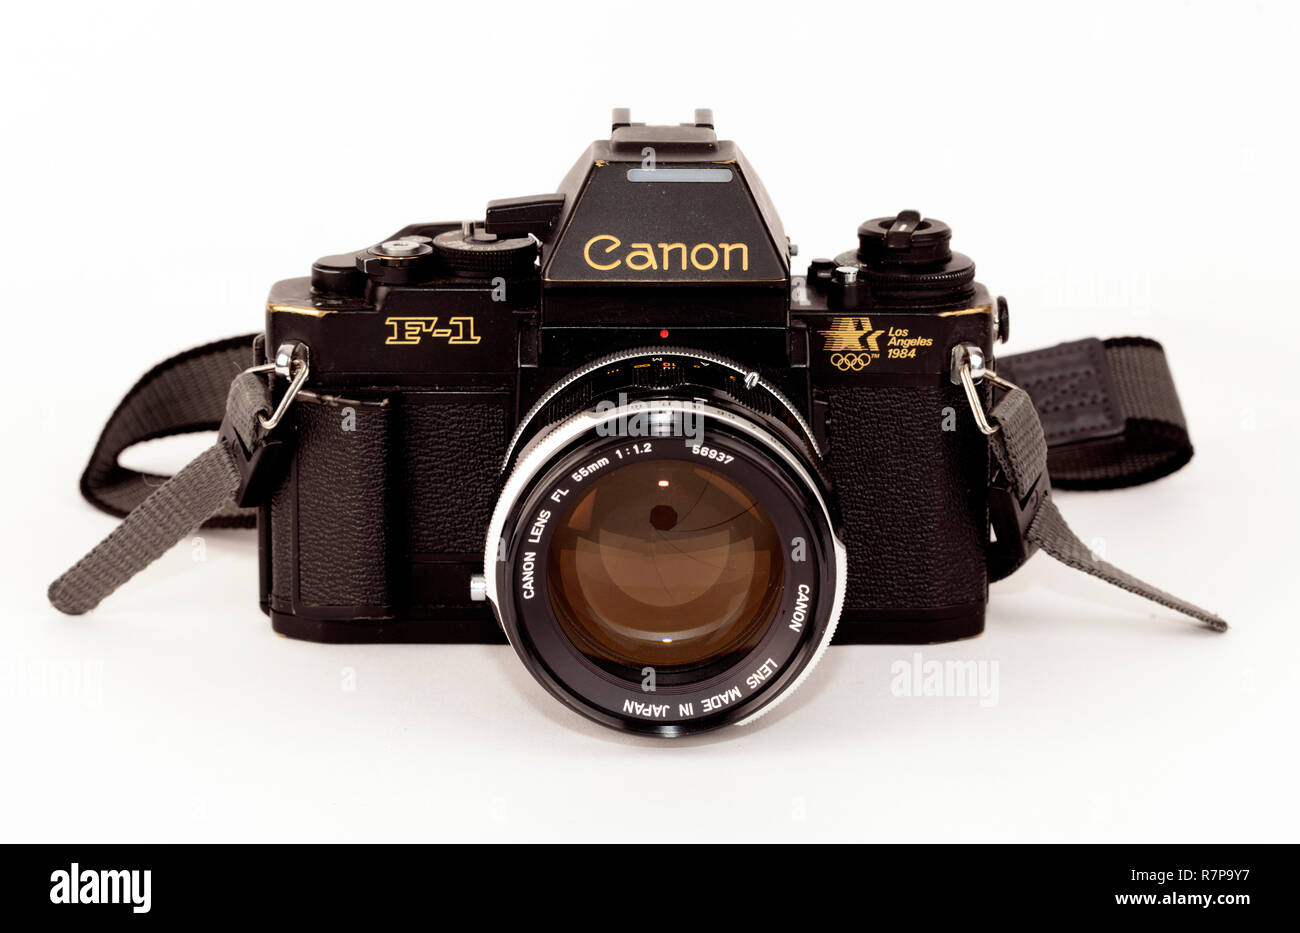 Canon Camera F1 High Resolution Stock Photography and Images - Alamy